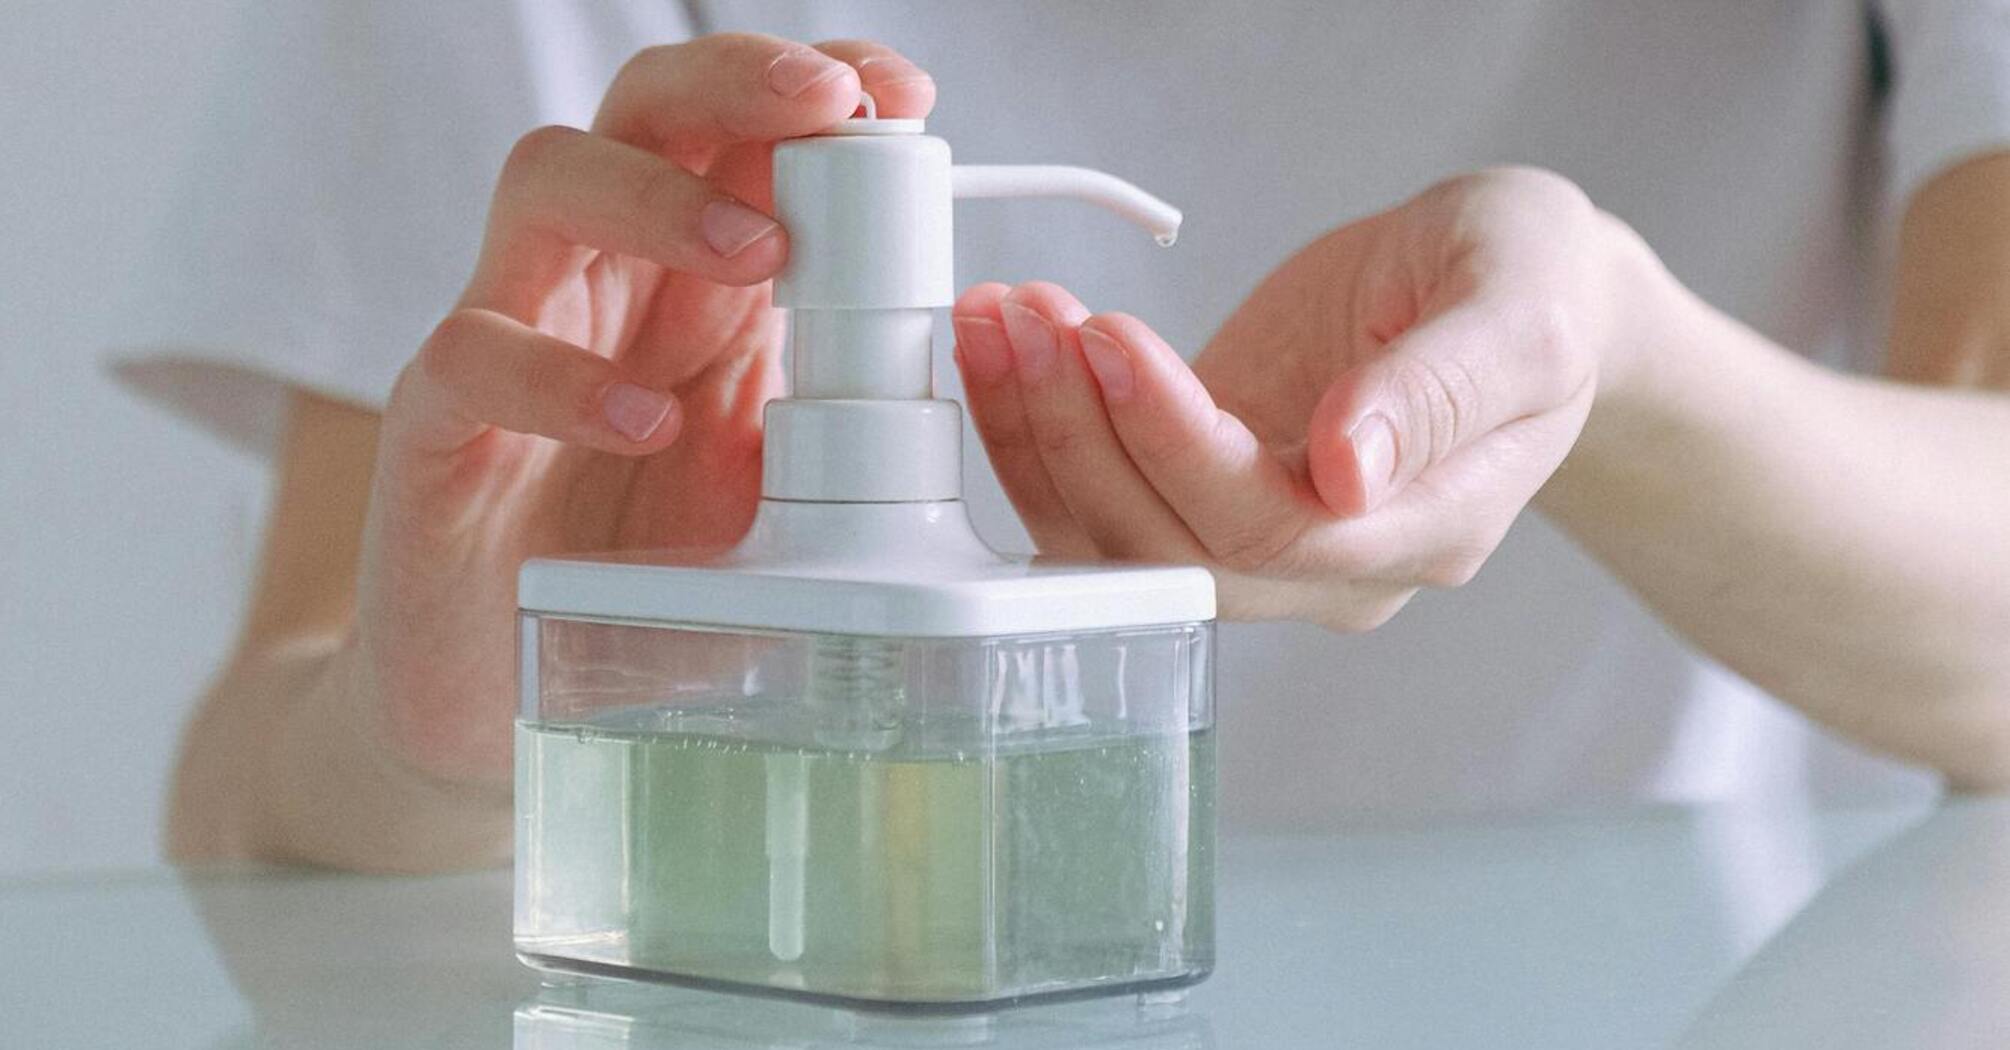 How to make sanitizers at home?